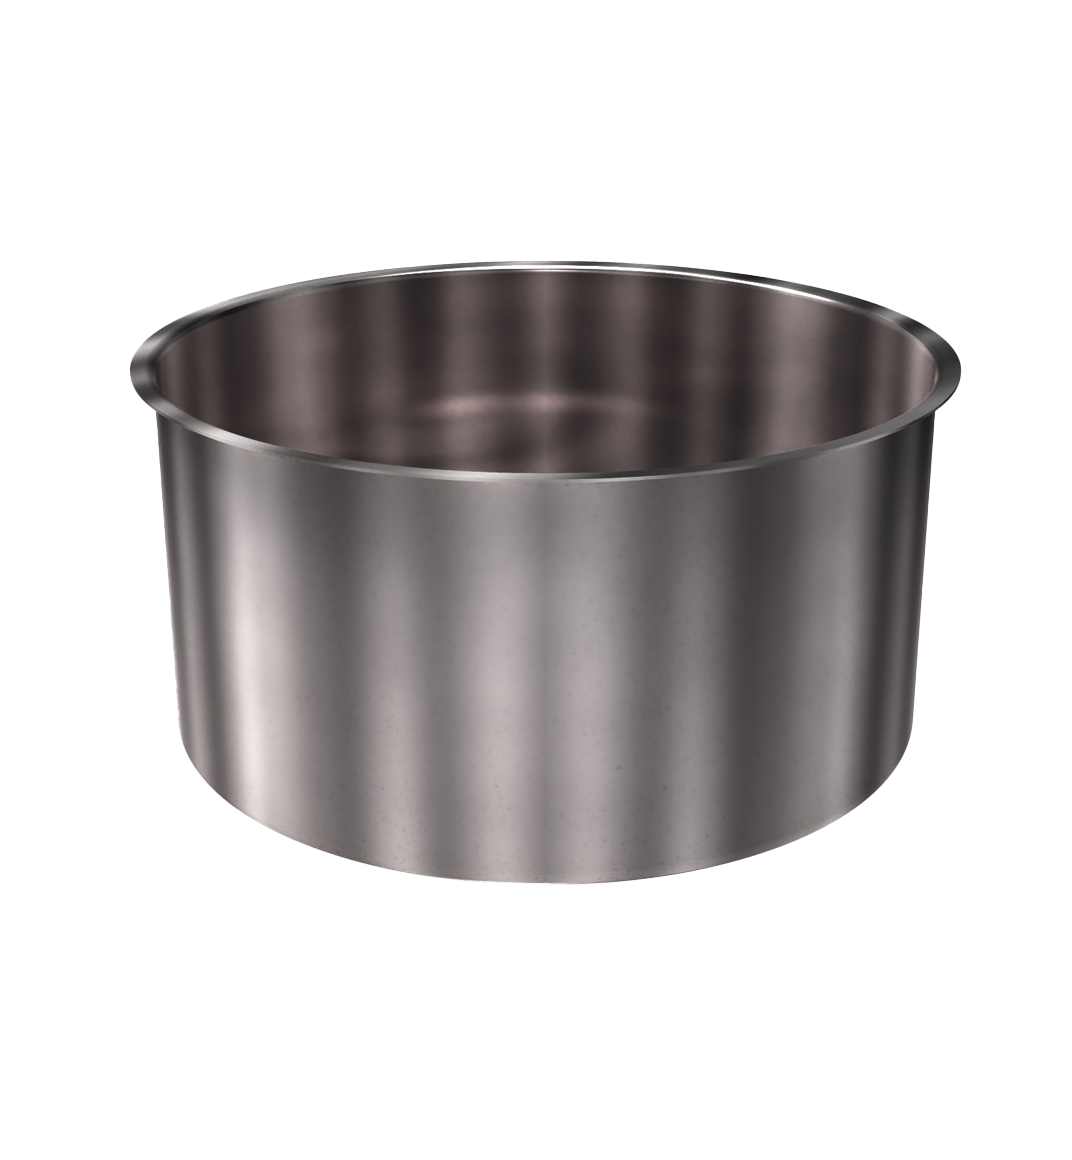 304 Stainless Steel Cup 13.34 Gallon 19.93" ID 10.23" OAH